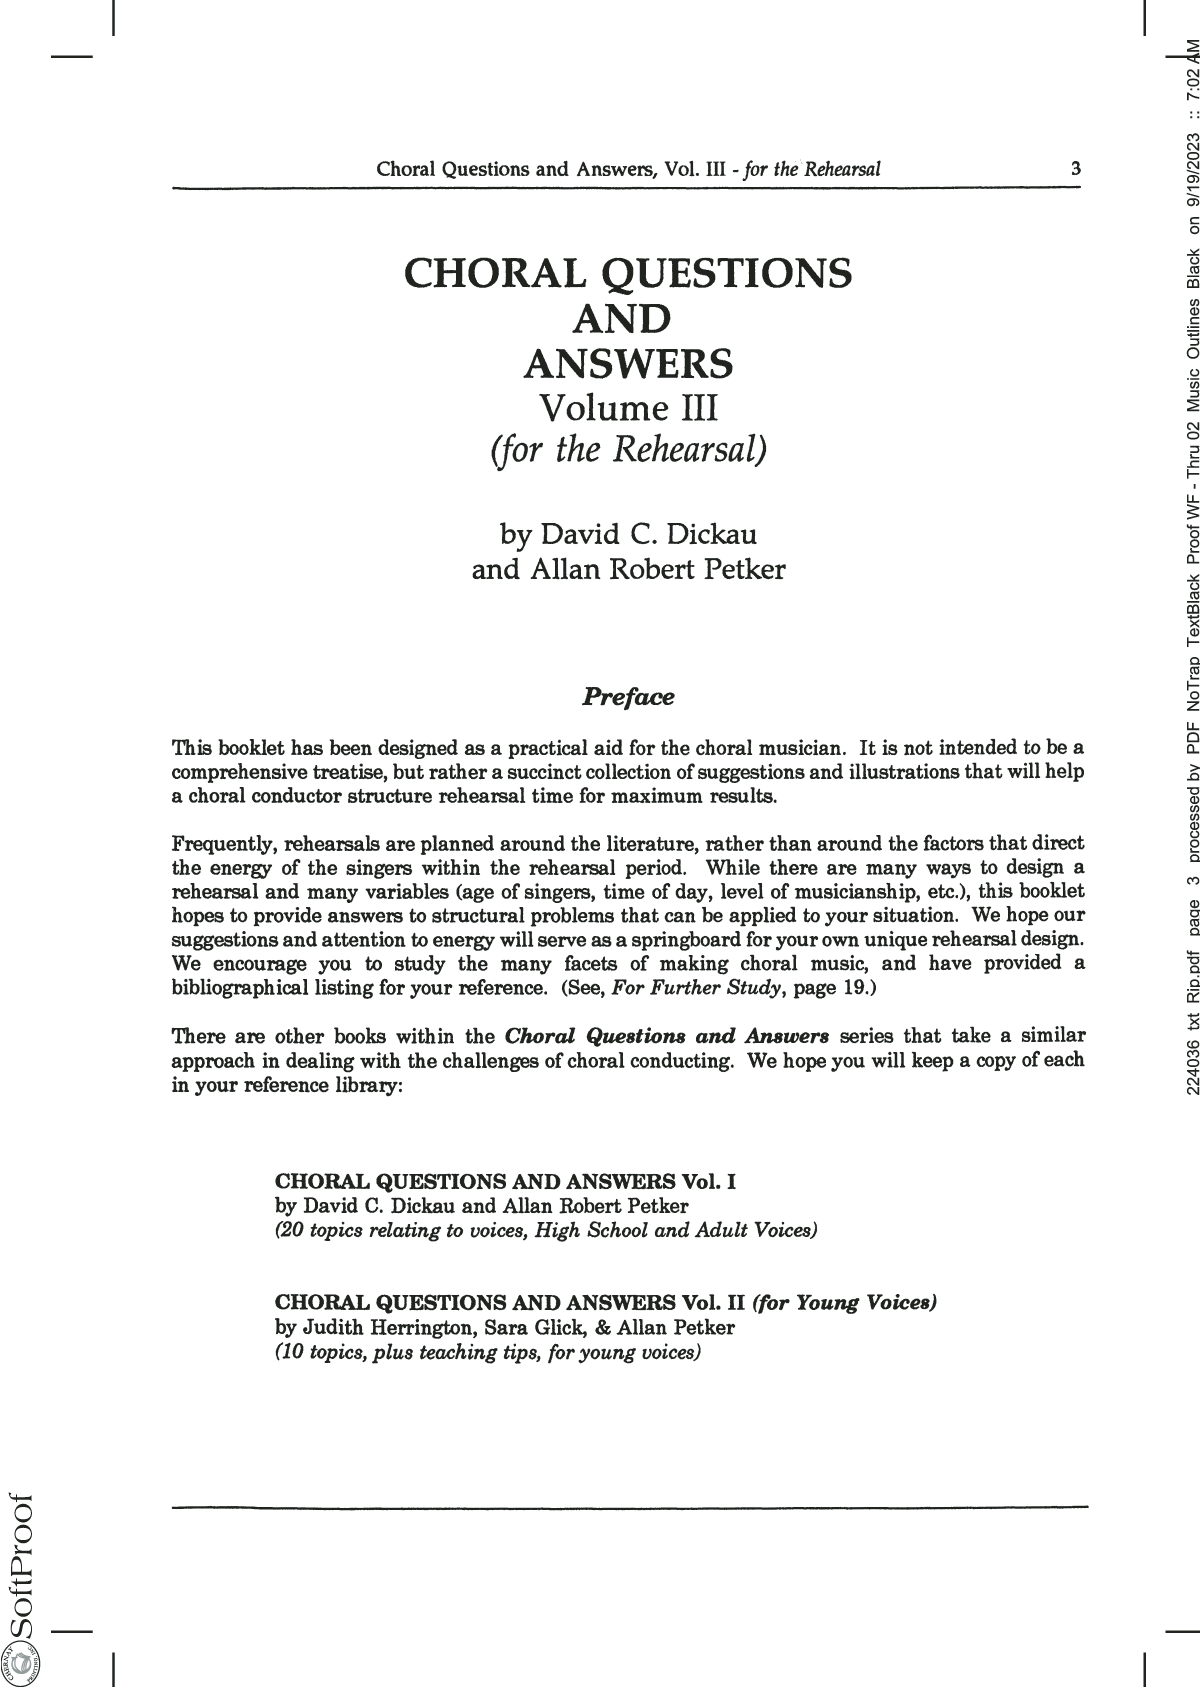 David C. Dickau Choral Questions And Answers, Volume III sheet music notes printable PDF score